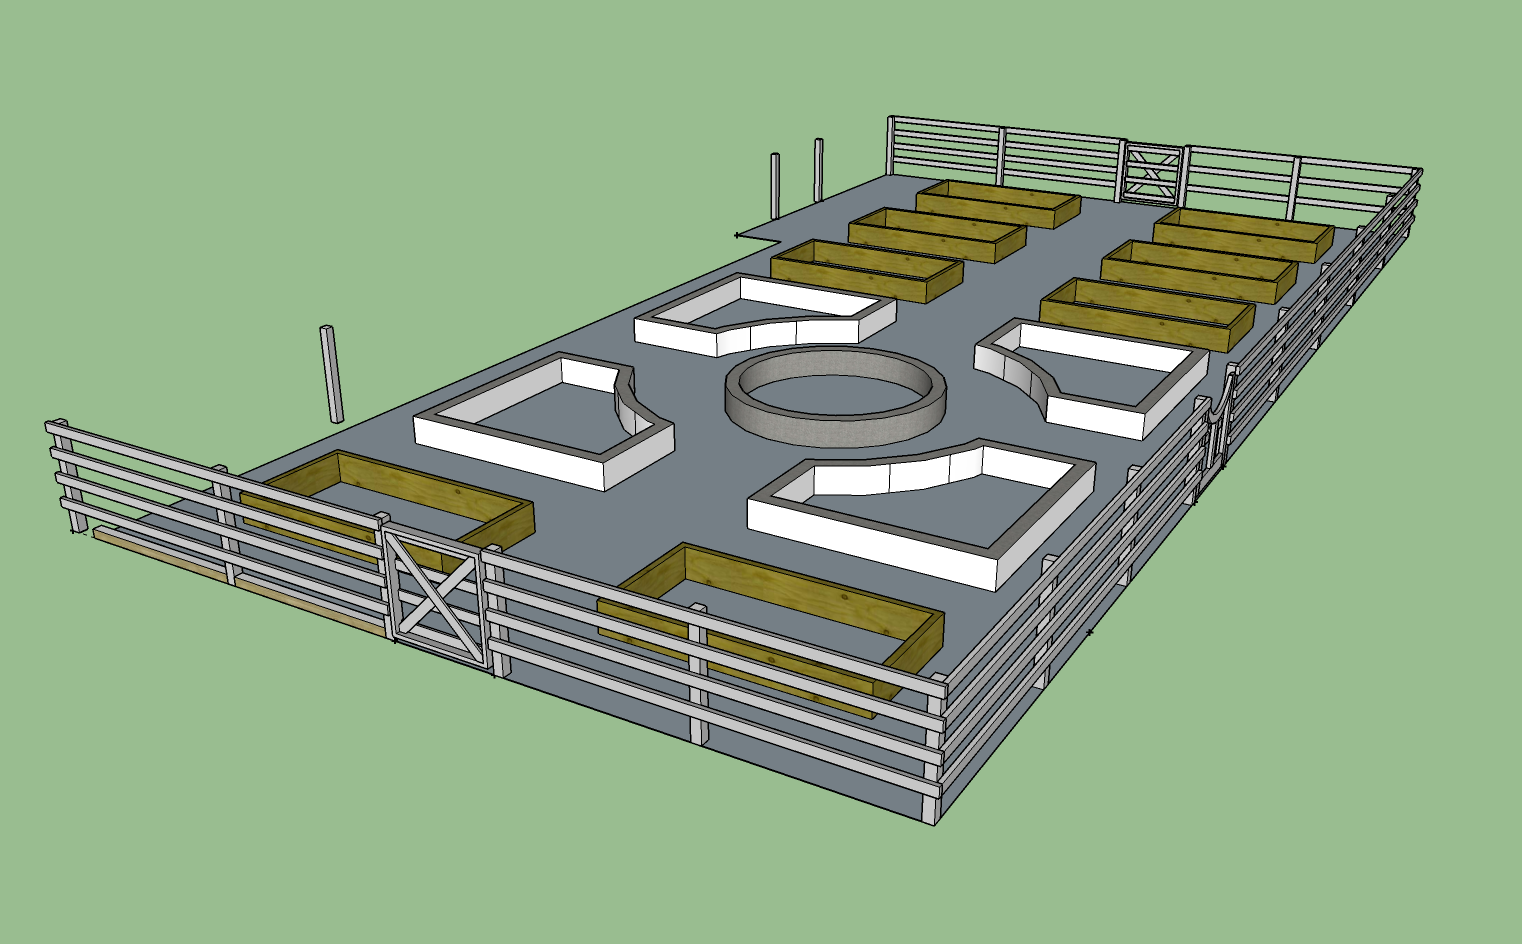 sketchup garden plan with fence and gates